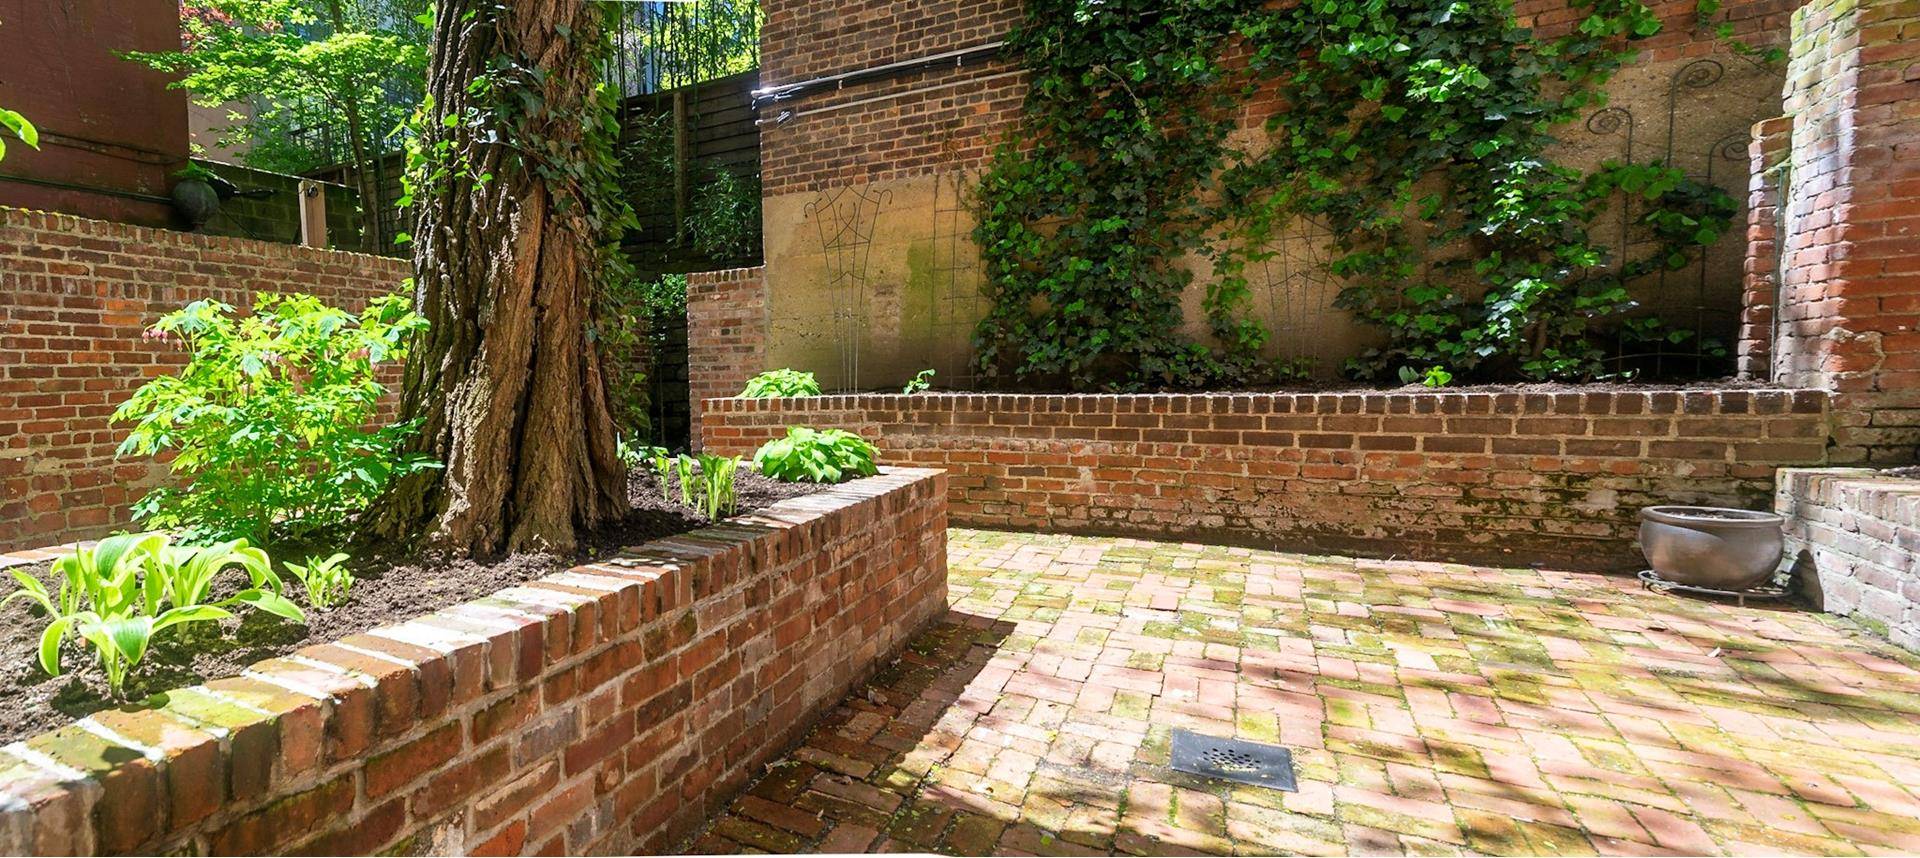 Private Outdoor and Renovated Secluded West Village Oasis with Townhouse Ambiance Be the first to occupy post renovation this 2 bed, 2 bath triplex with separate living and dining rooms, ...